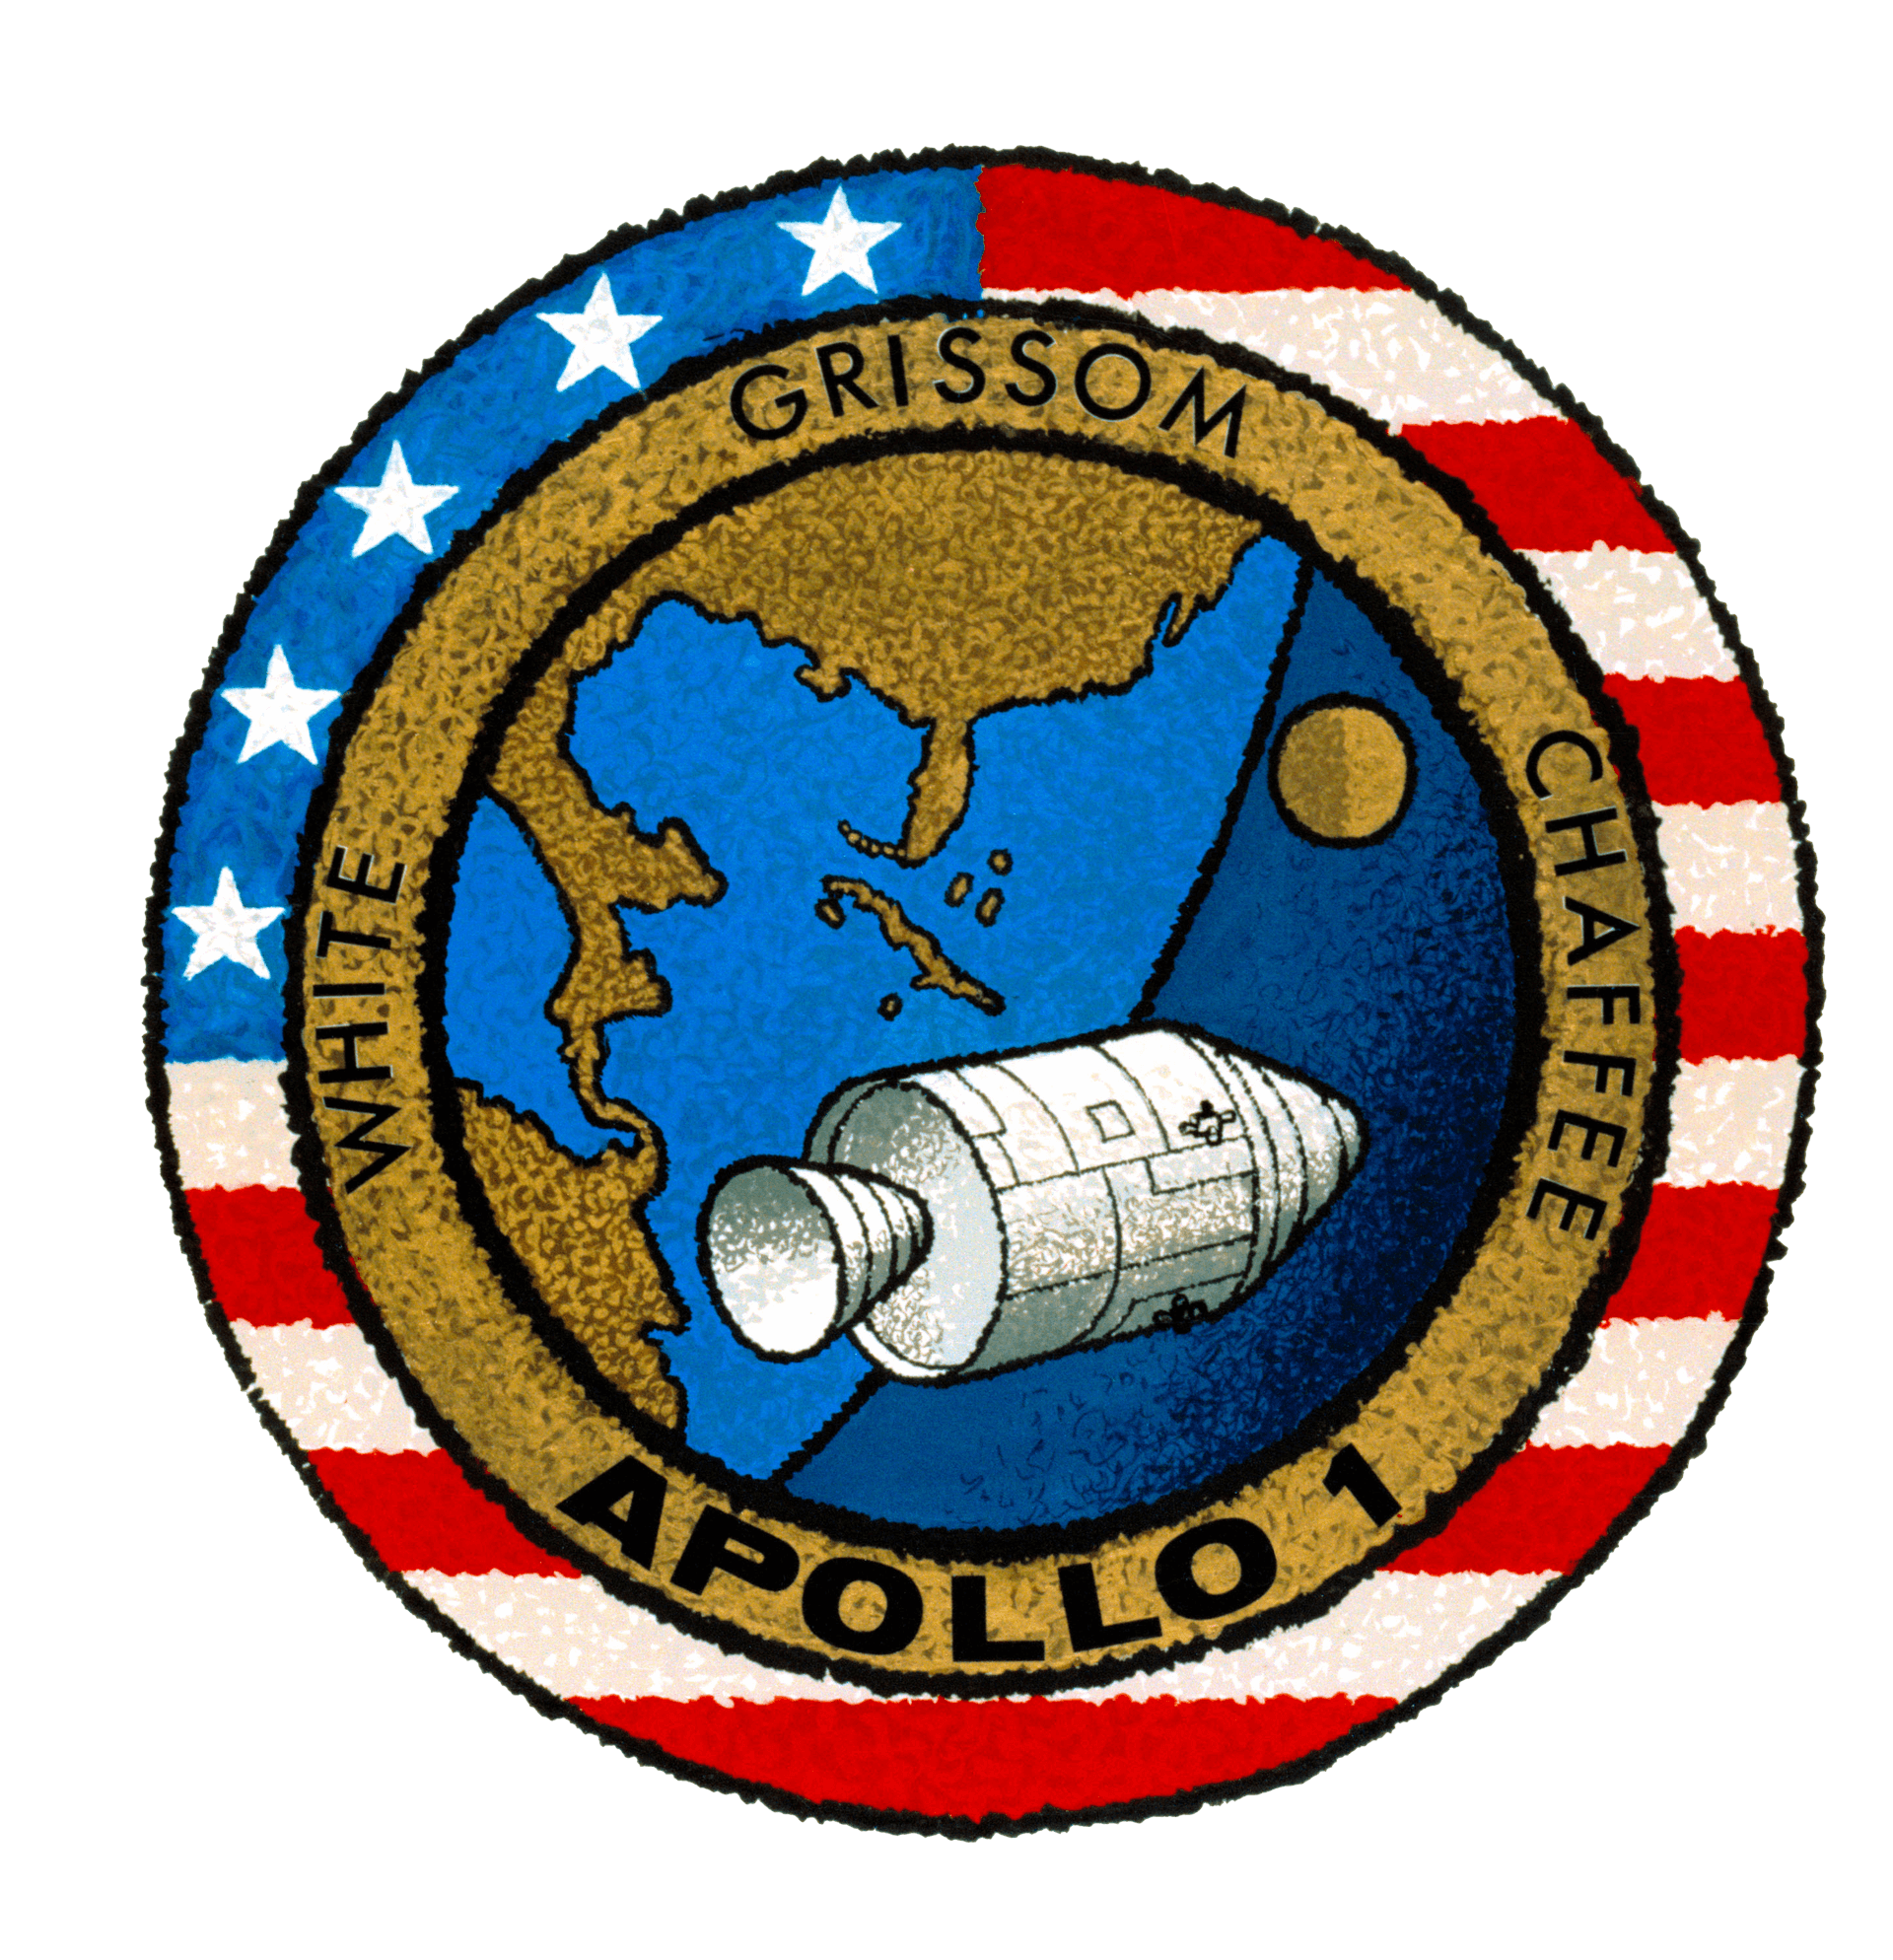 Mission patch for Apollo 1